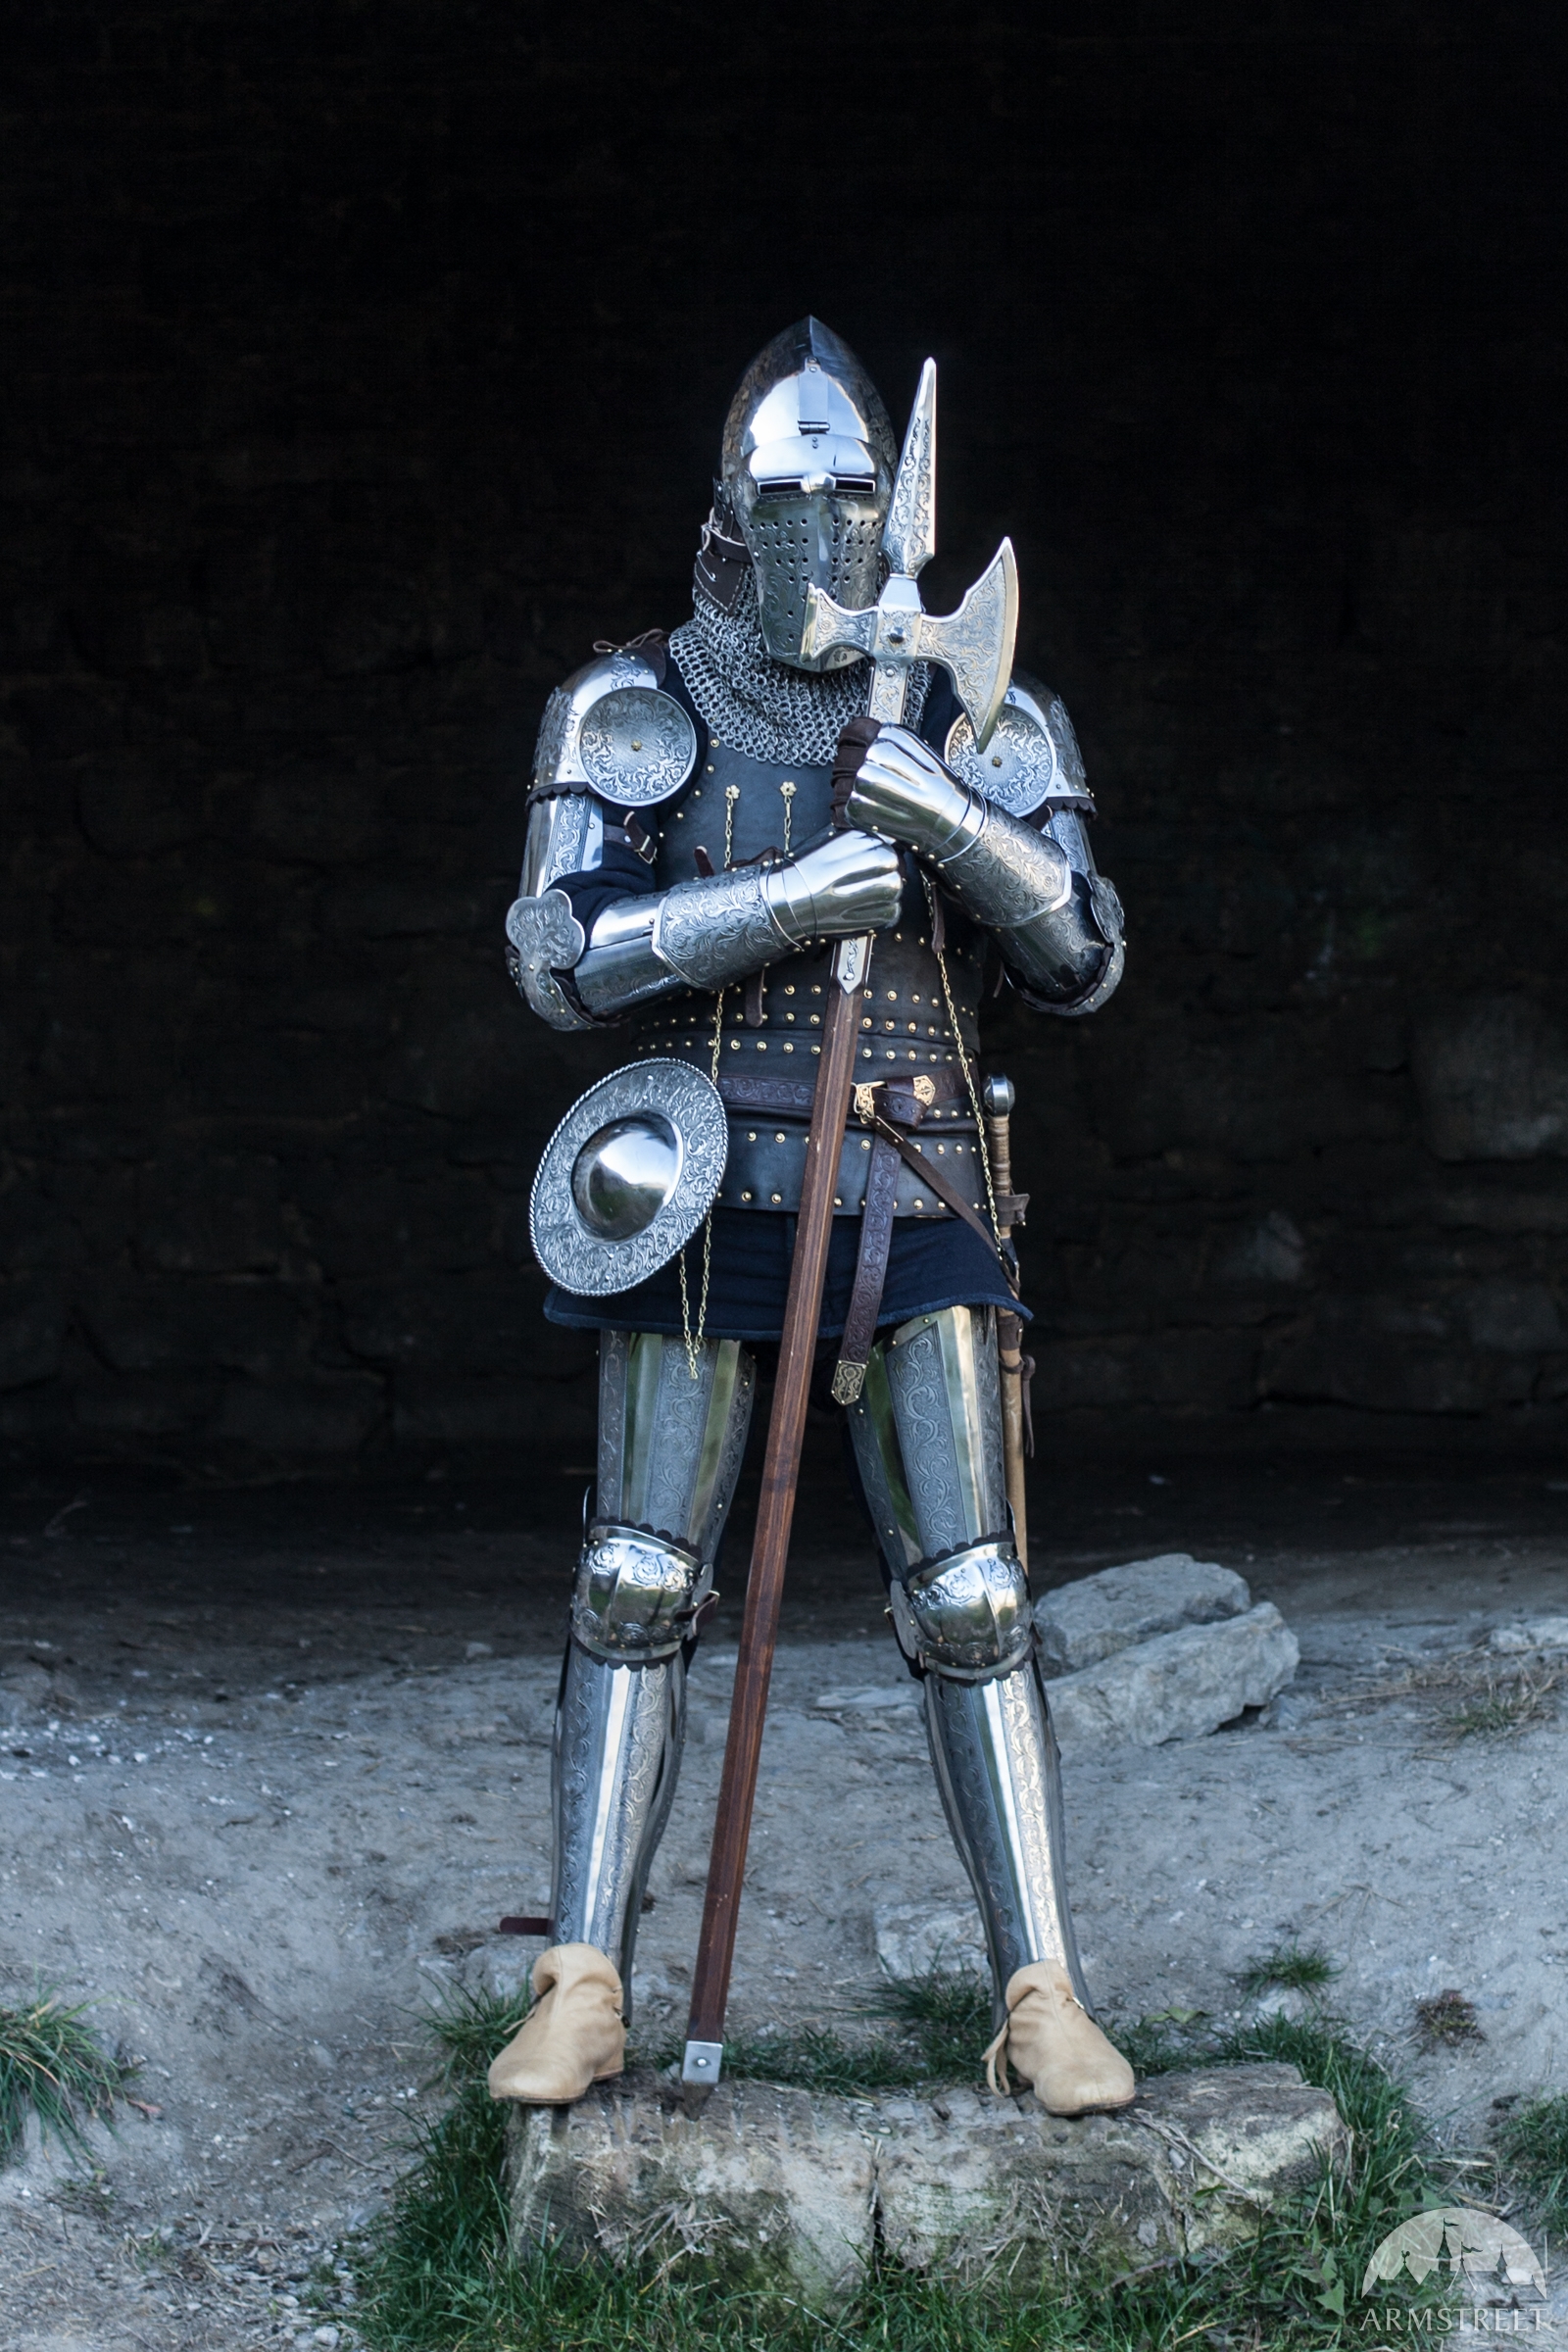 Armor Full Kit “Knight of Fortune” Circa XIV | Knight, Medieval and ...